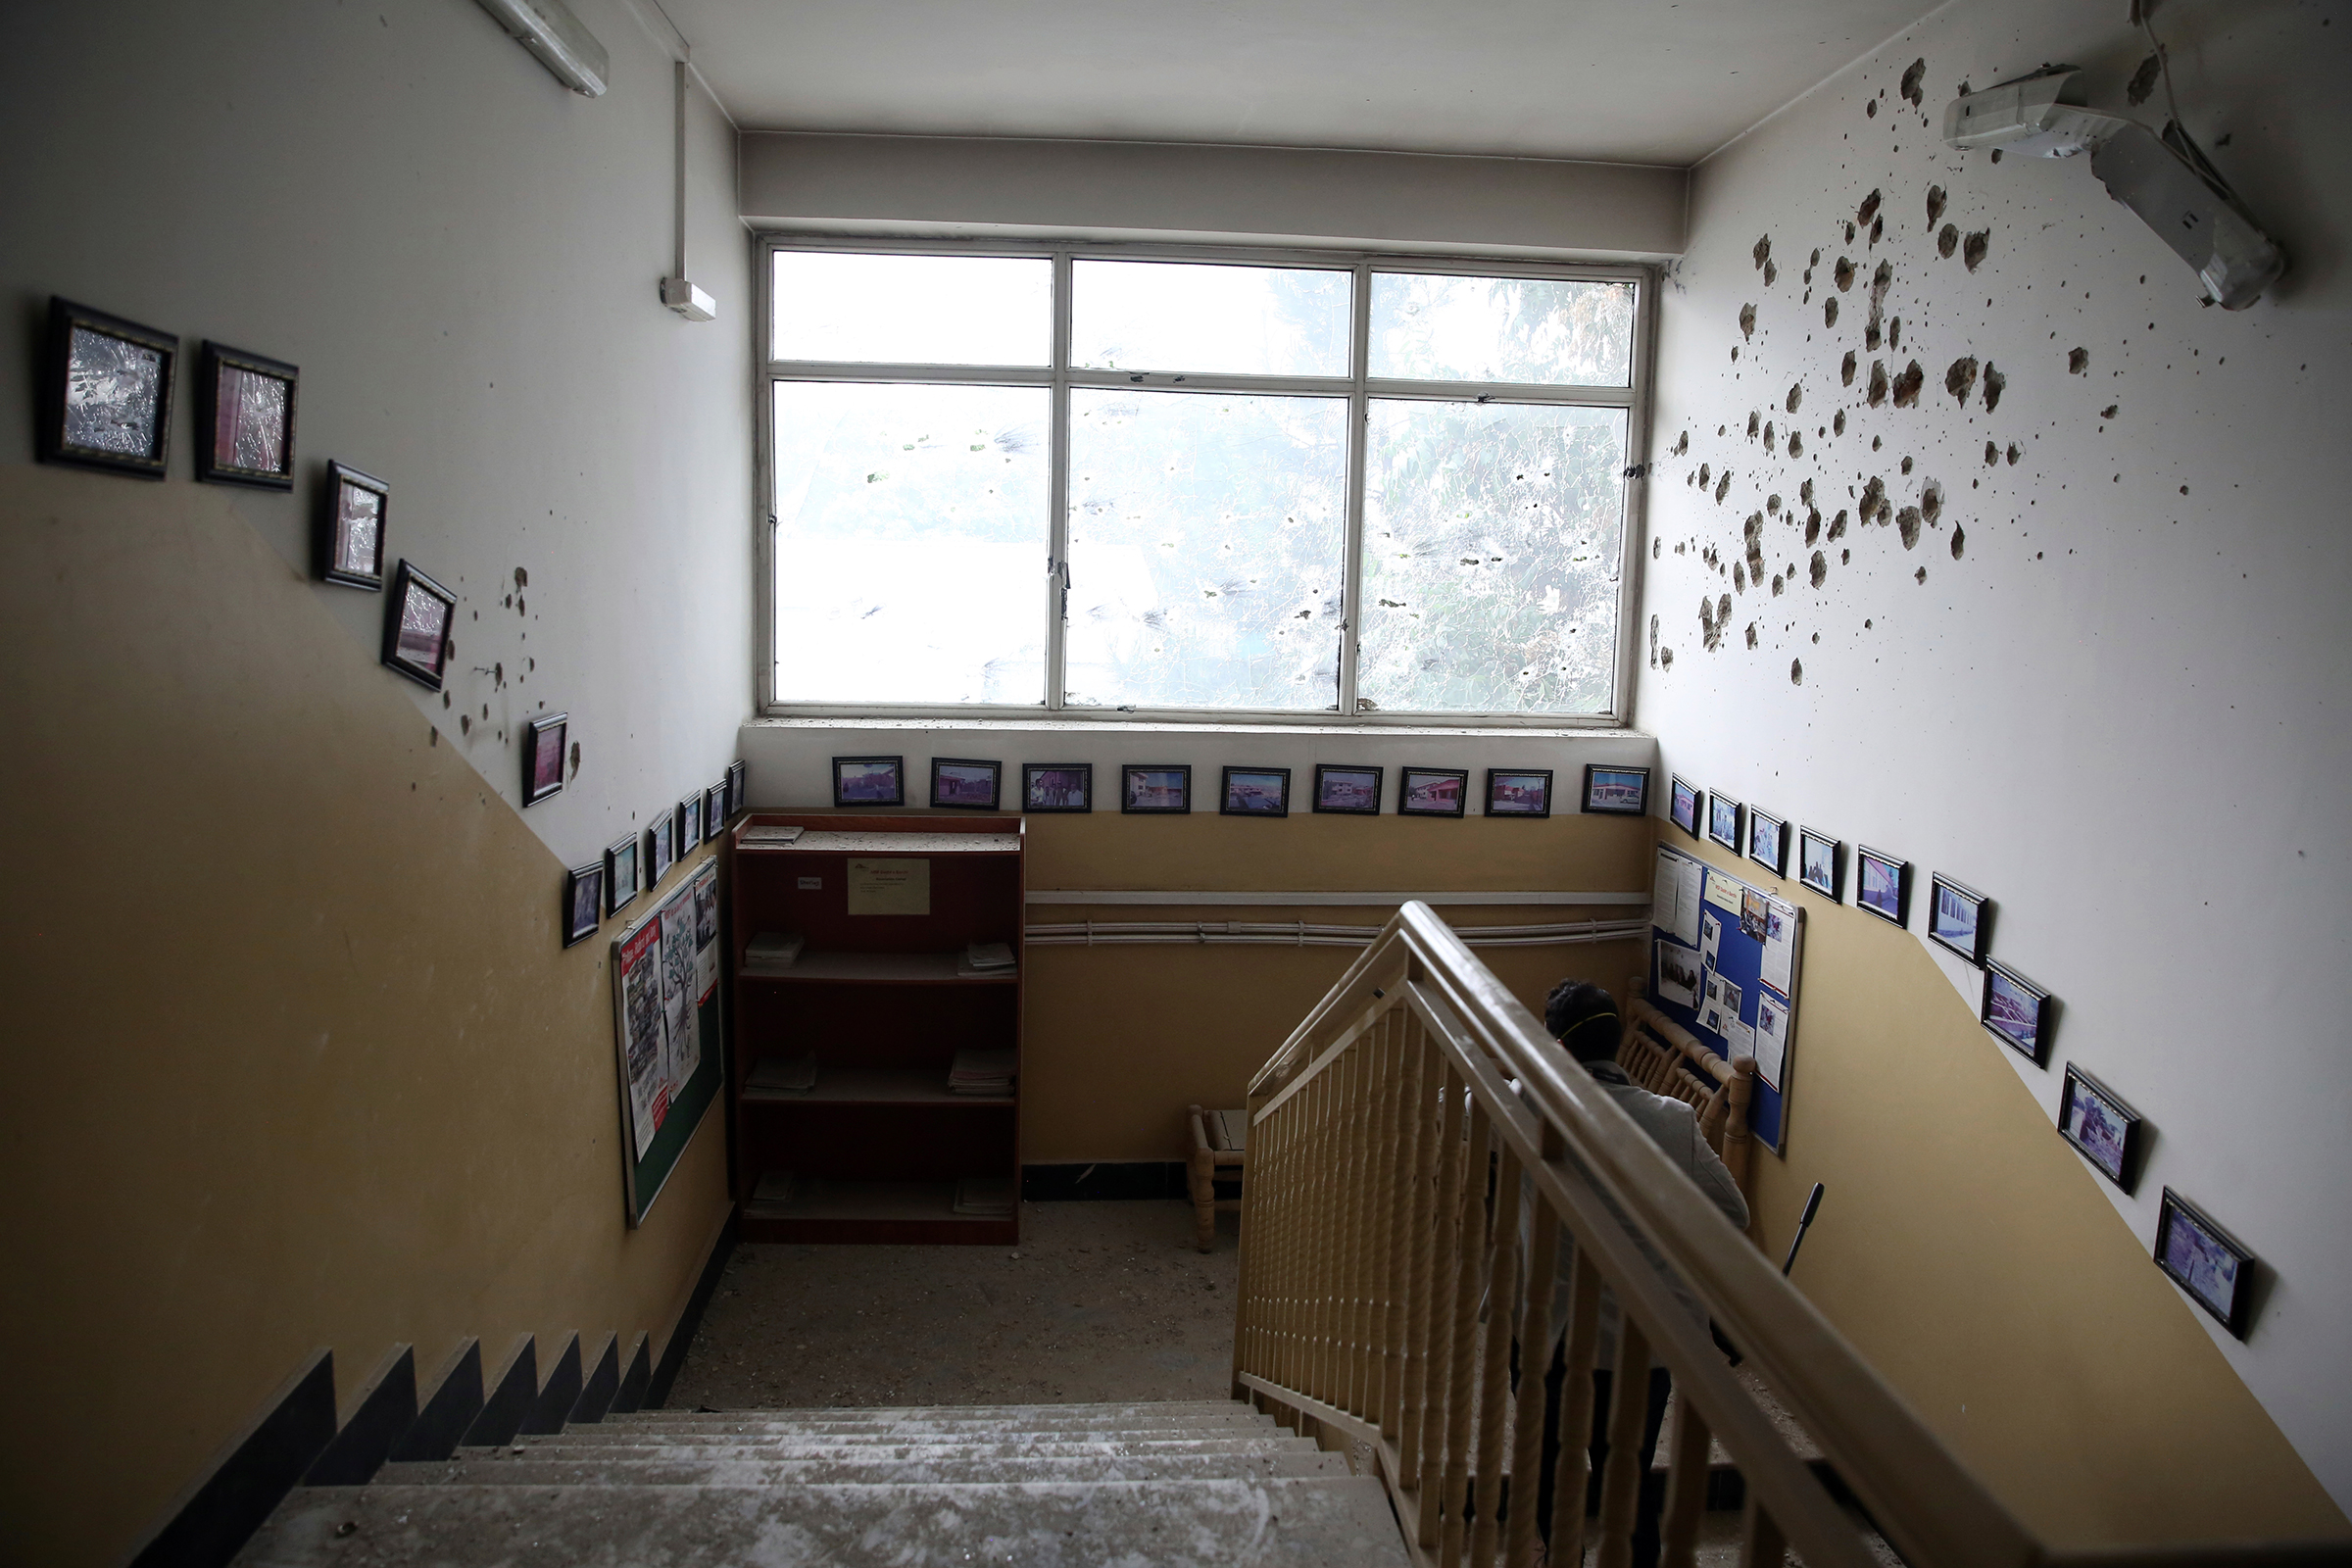 Bullet holes line the wall of the maternity hospital, after gunmen stormed the facility, in Kabul on May 12.